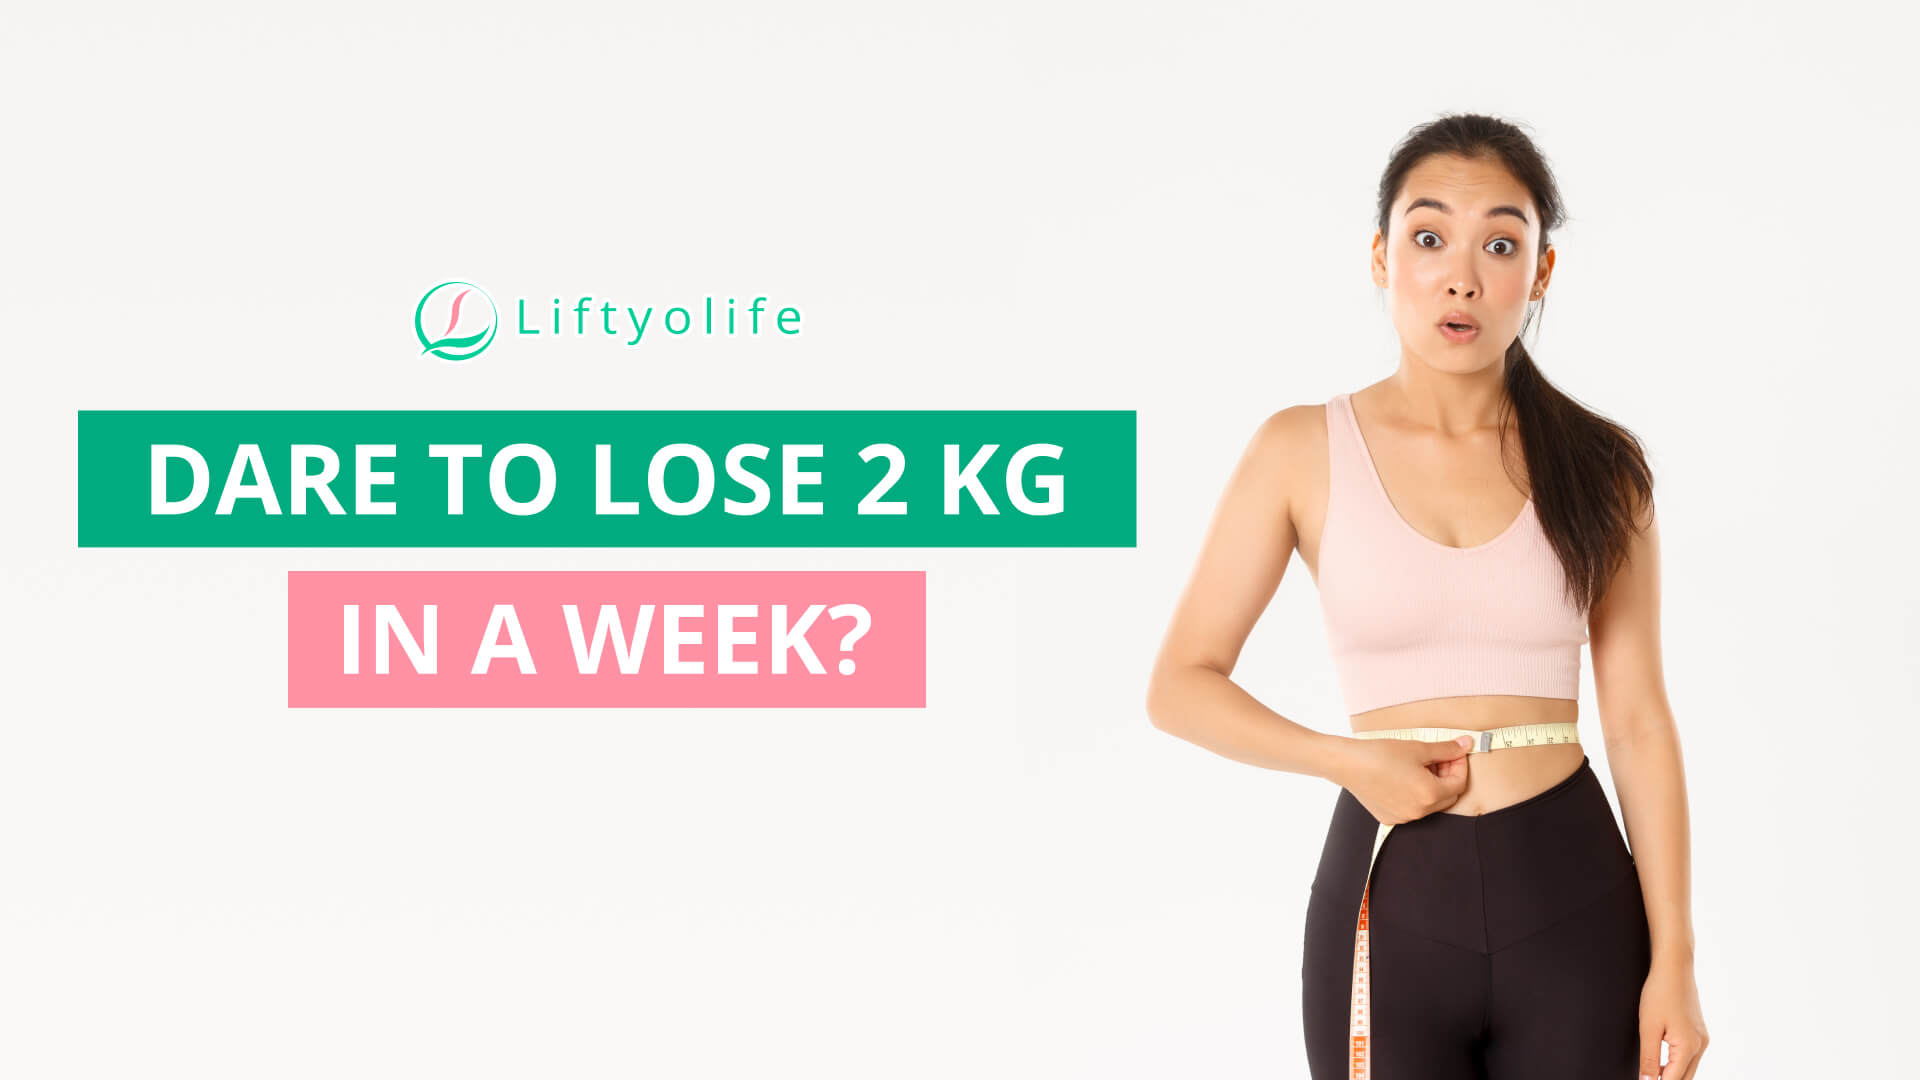 How To Lose 2 Kg In A Week?